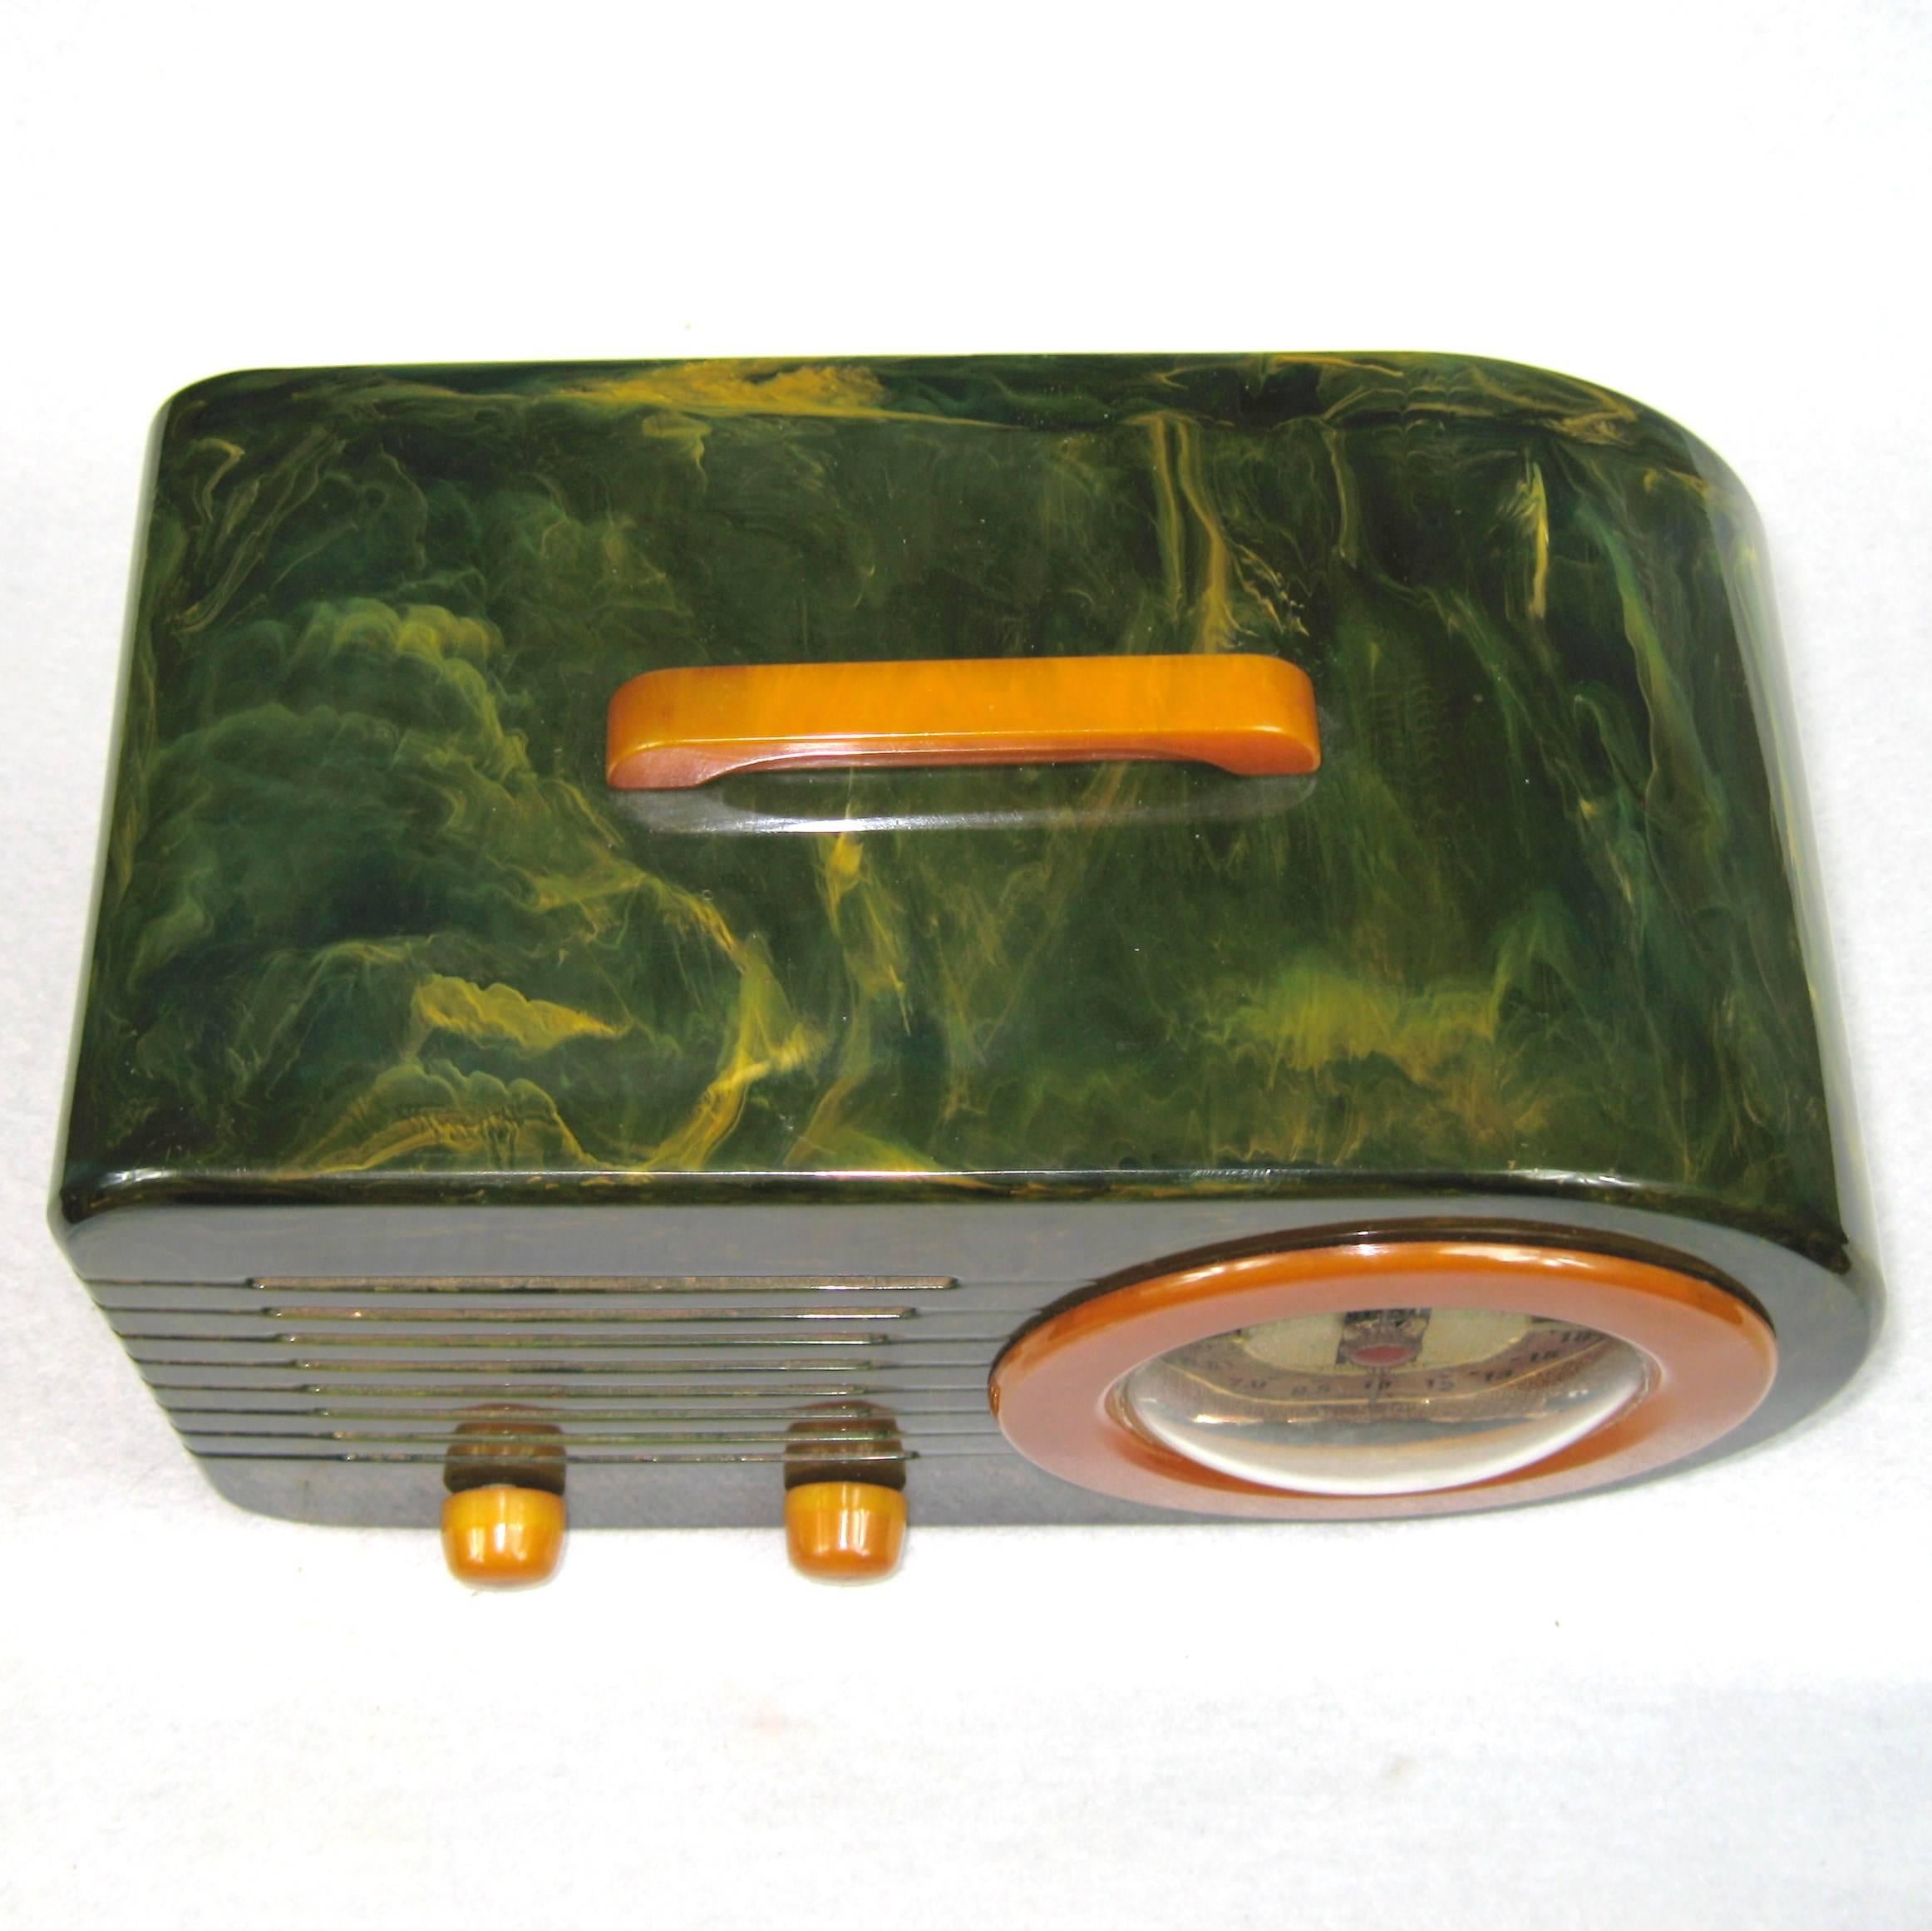 1940 Fada Bullet Catalin / Bakelite Tube Radio.
Blue case with pumpkin trim. This radio is very rare with short wave (Model 116).
The radio is original and in excellent condition, no cracks, no chips, no breaks, no repairs and No spray paint.